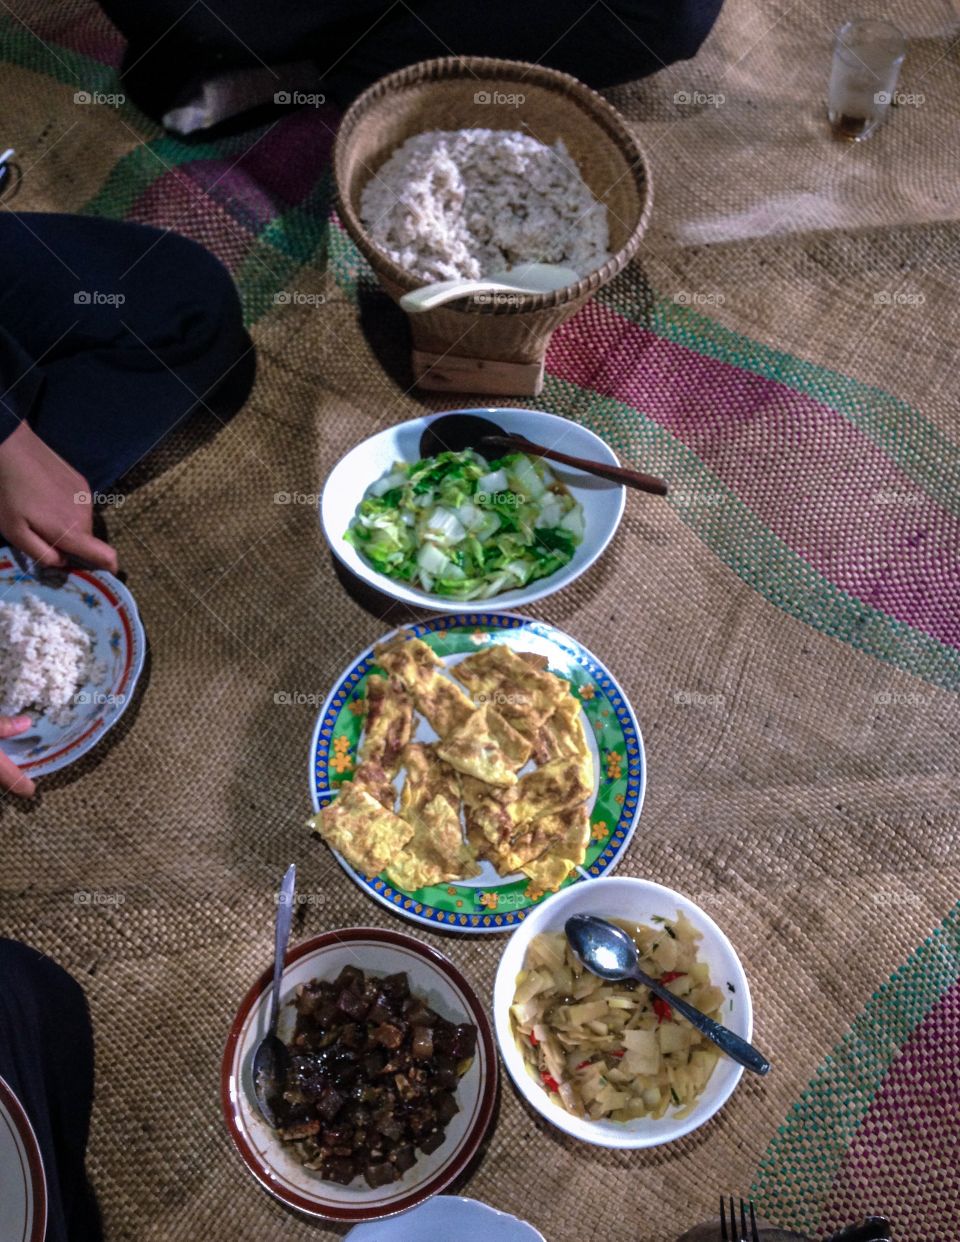 Indonesian village meal at the guest house